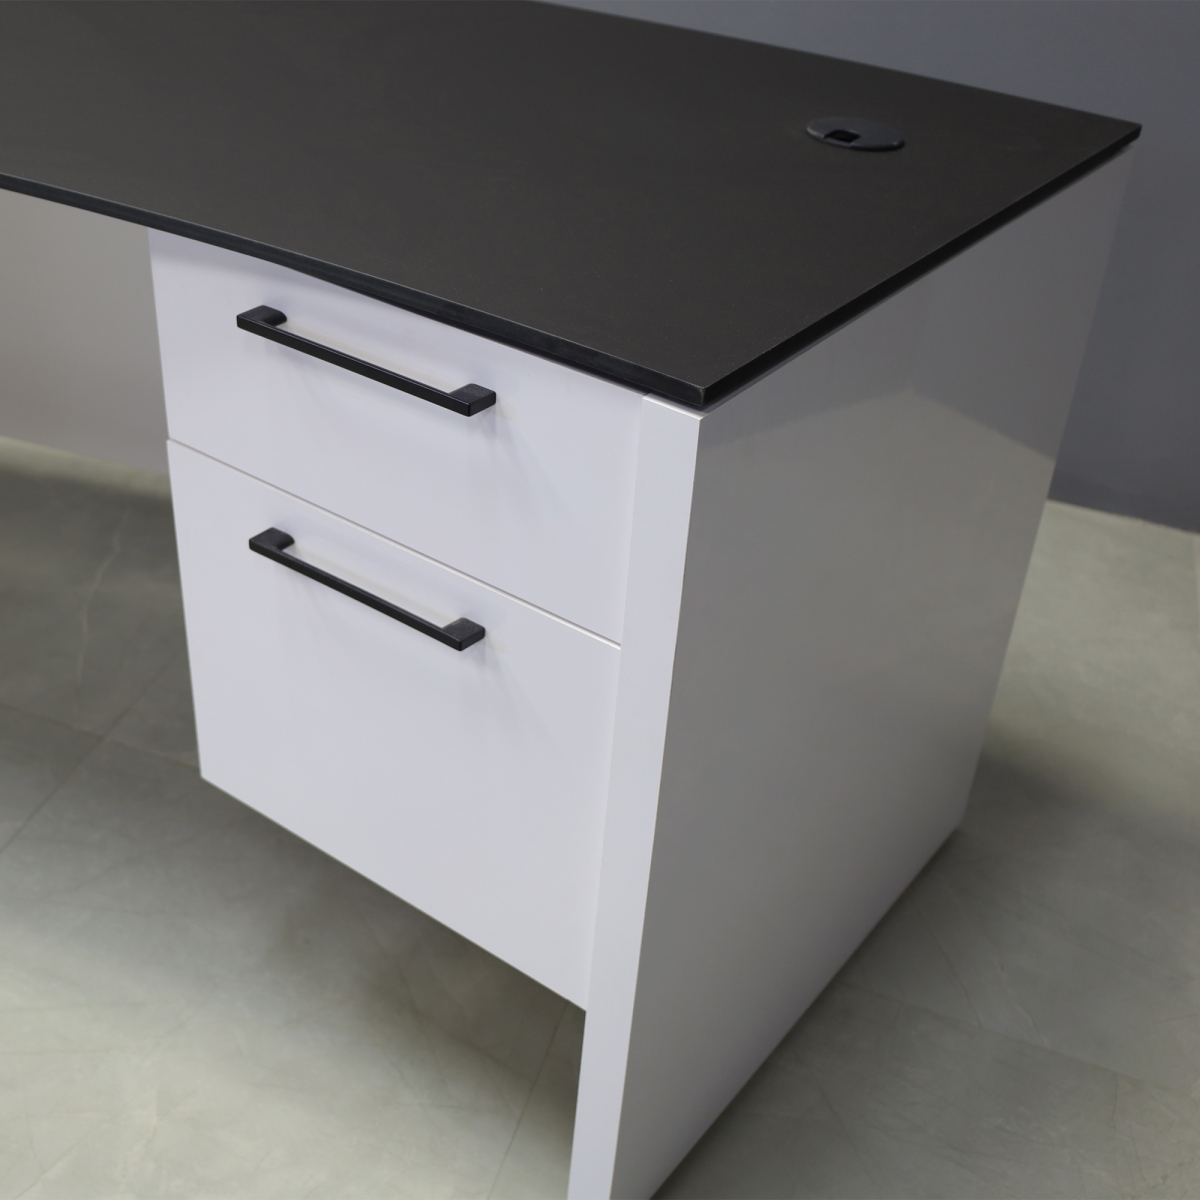 Seattle Curved Executive Desk with Engineered Stone Top